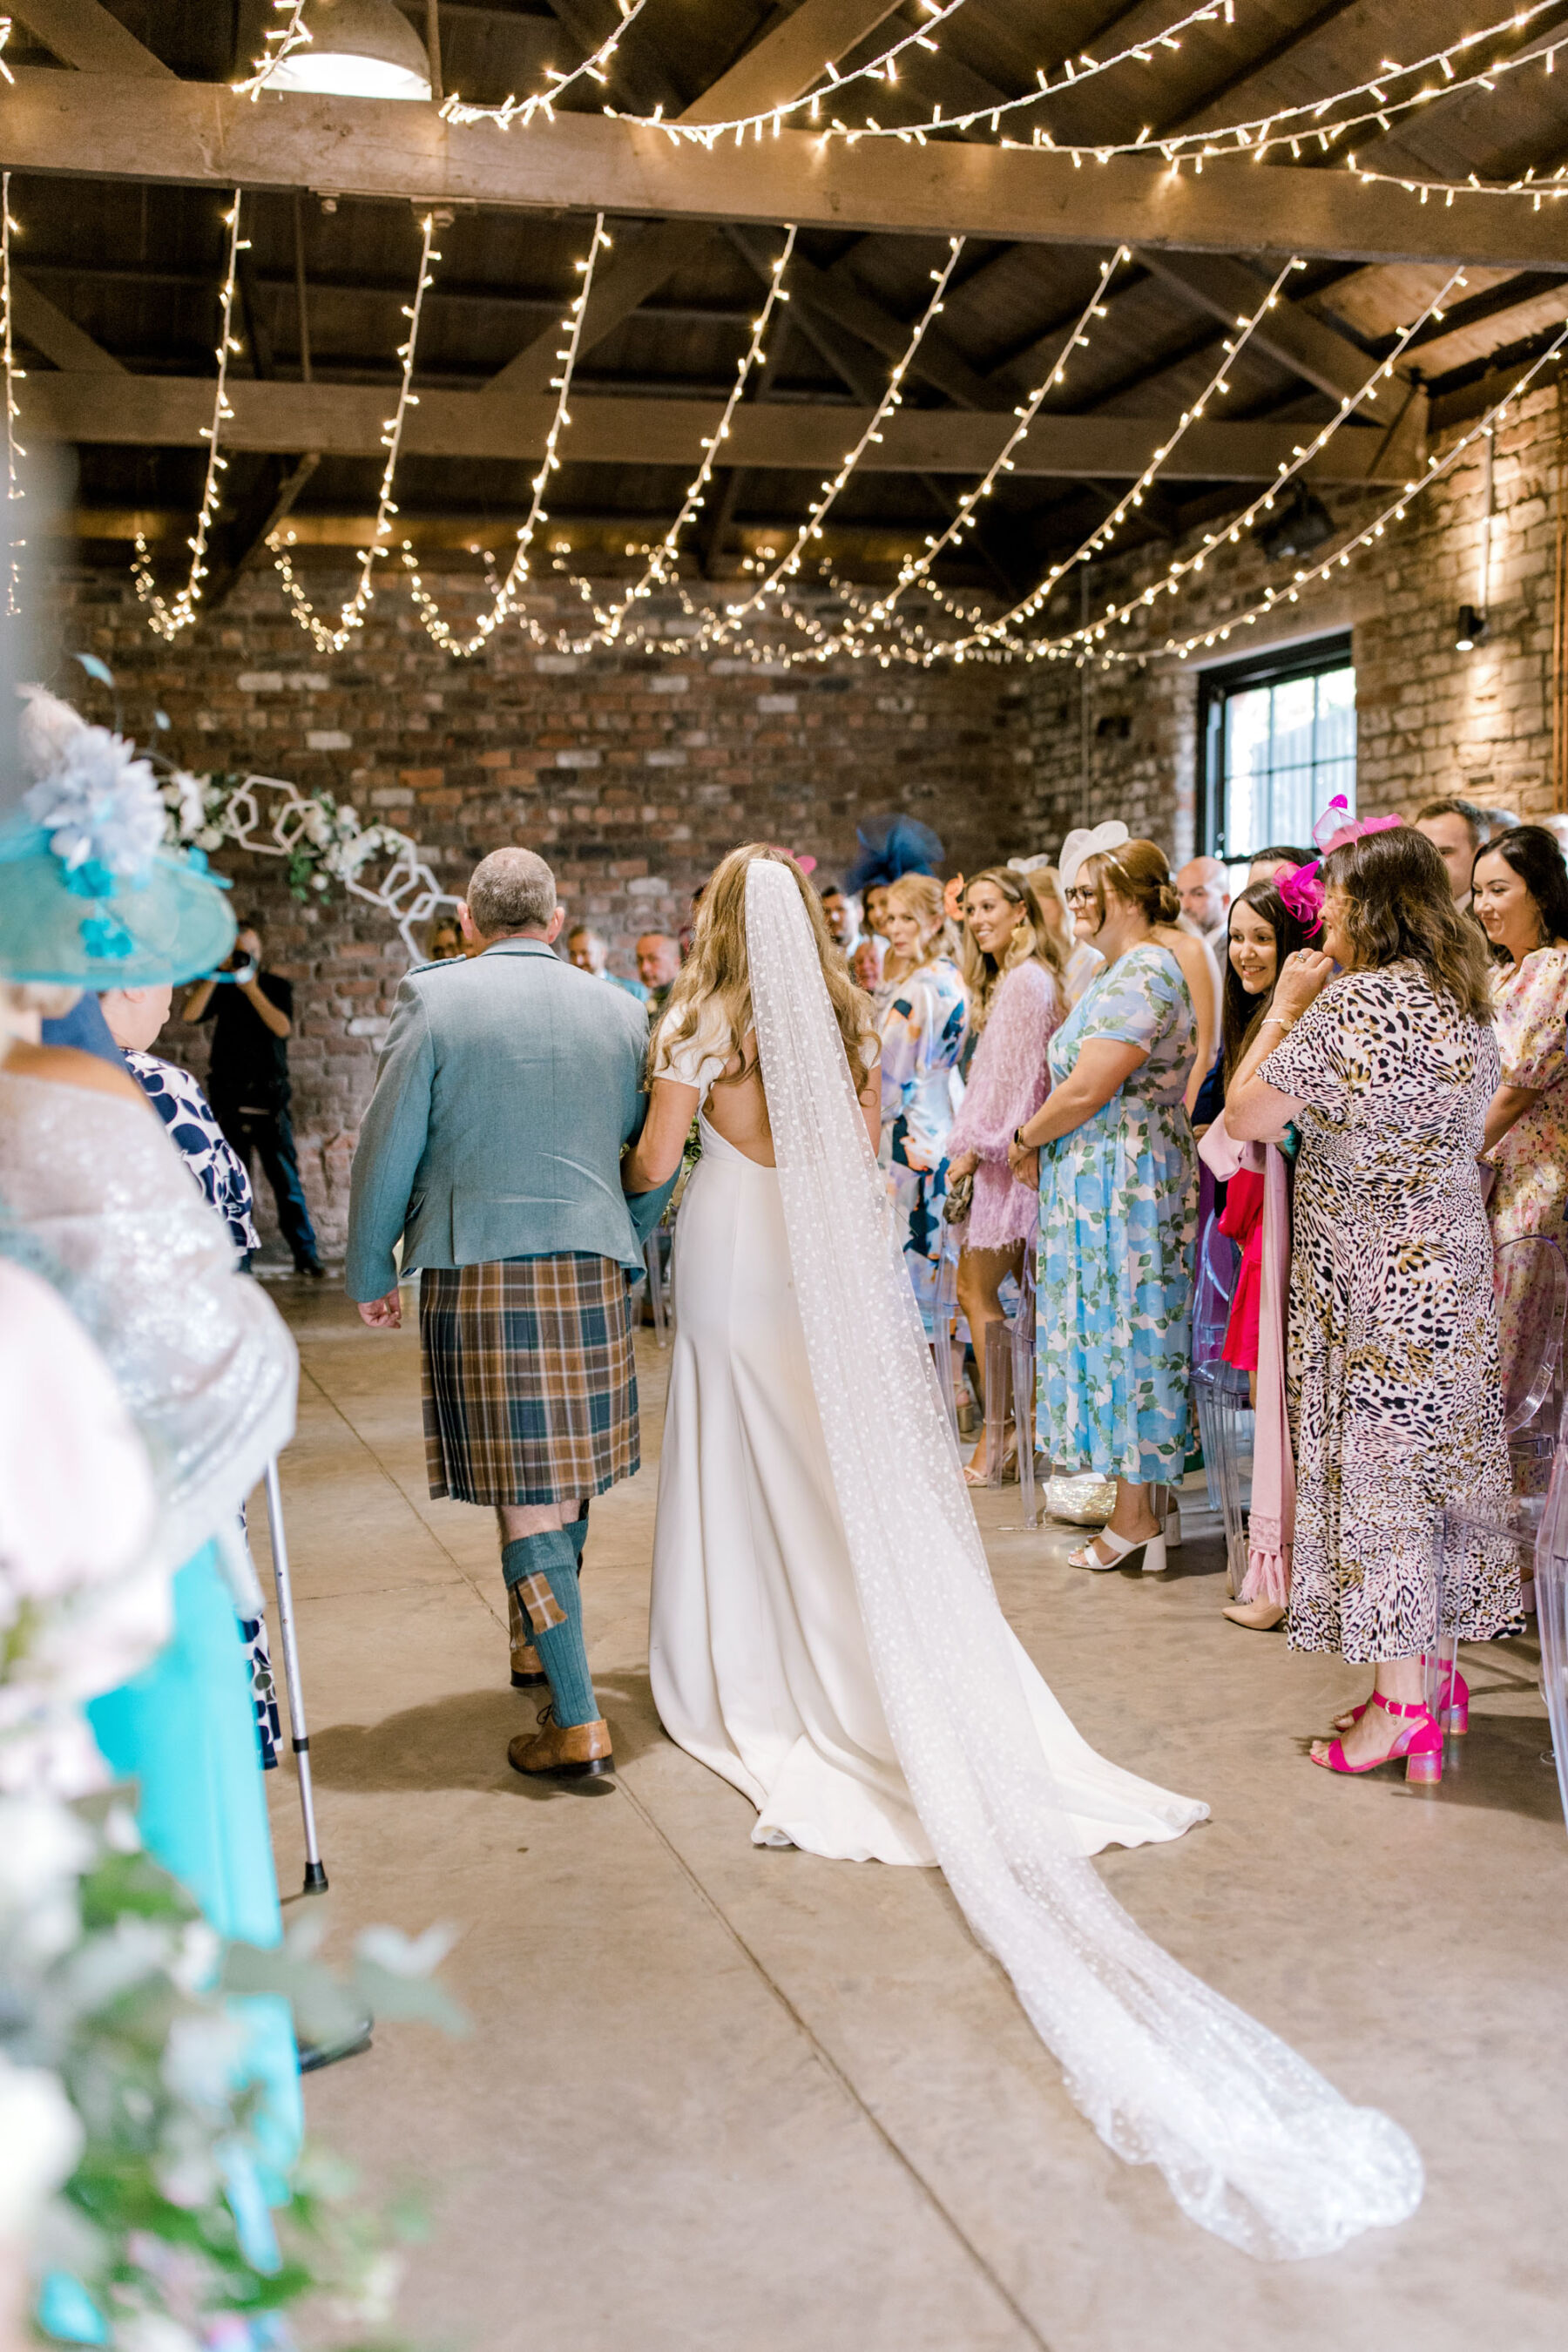 Bride wearing a Sarah Seven backless wedding dress, walking beneath a canopy of fairylights at Glasgow Engine Works industrial wedding venue